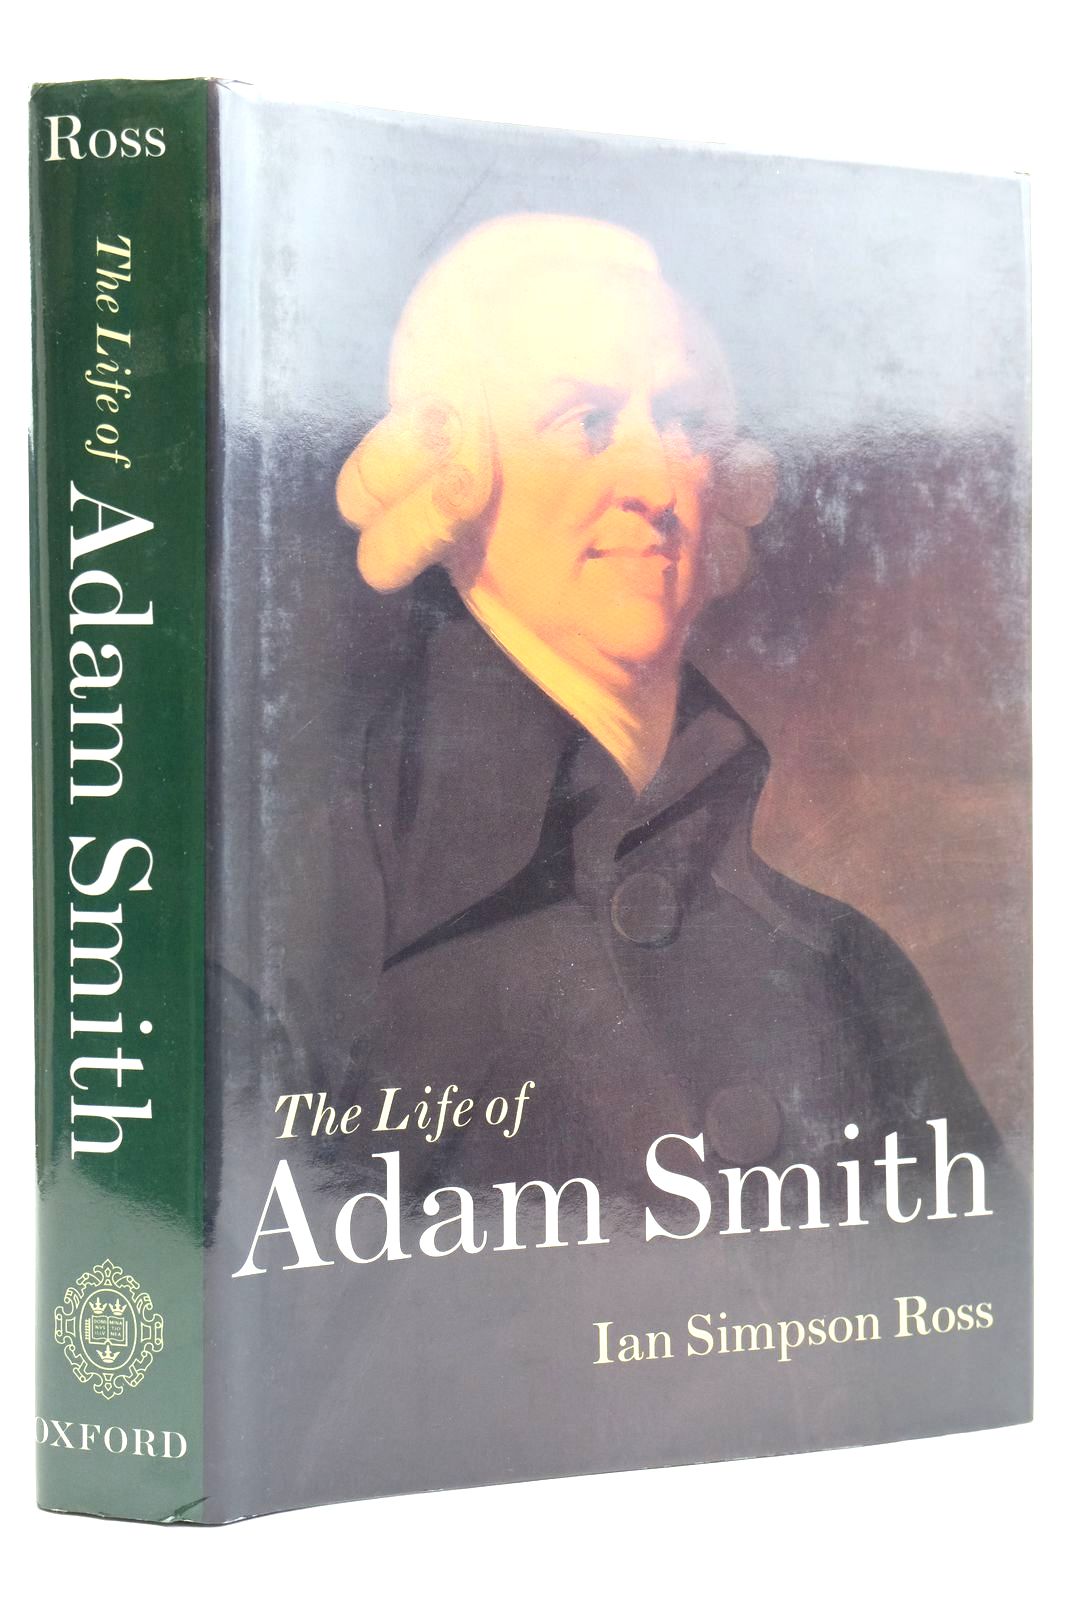 Photo of THE LIFE OF ADAM SMITH written by Ross, Ian Simpson published by Clarendon Press (STOCK CODE: 2132517)  for sale by Stella & Rose's Books